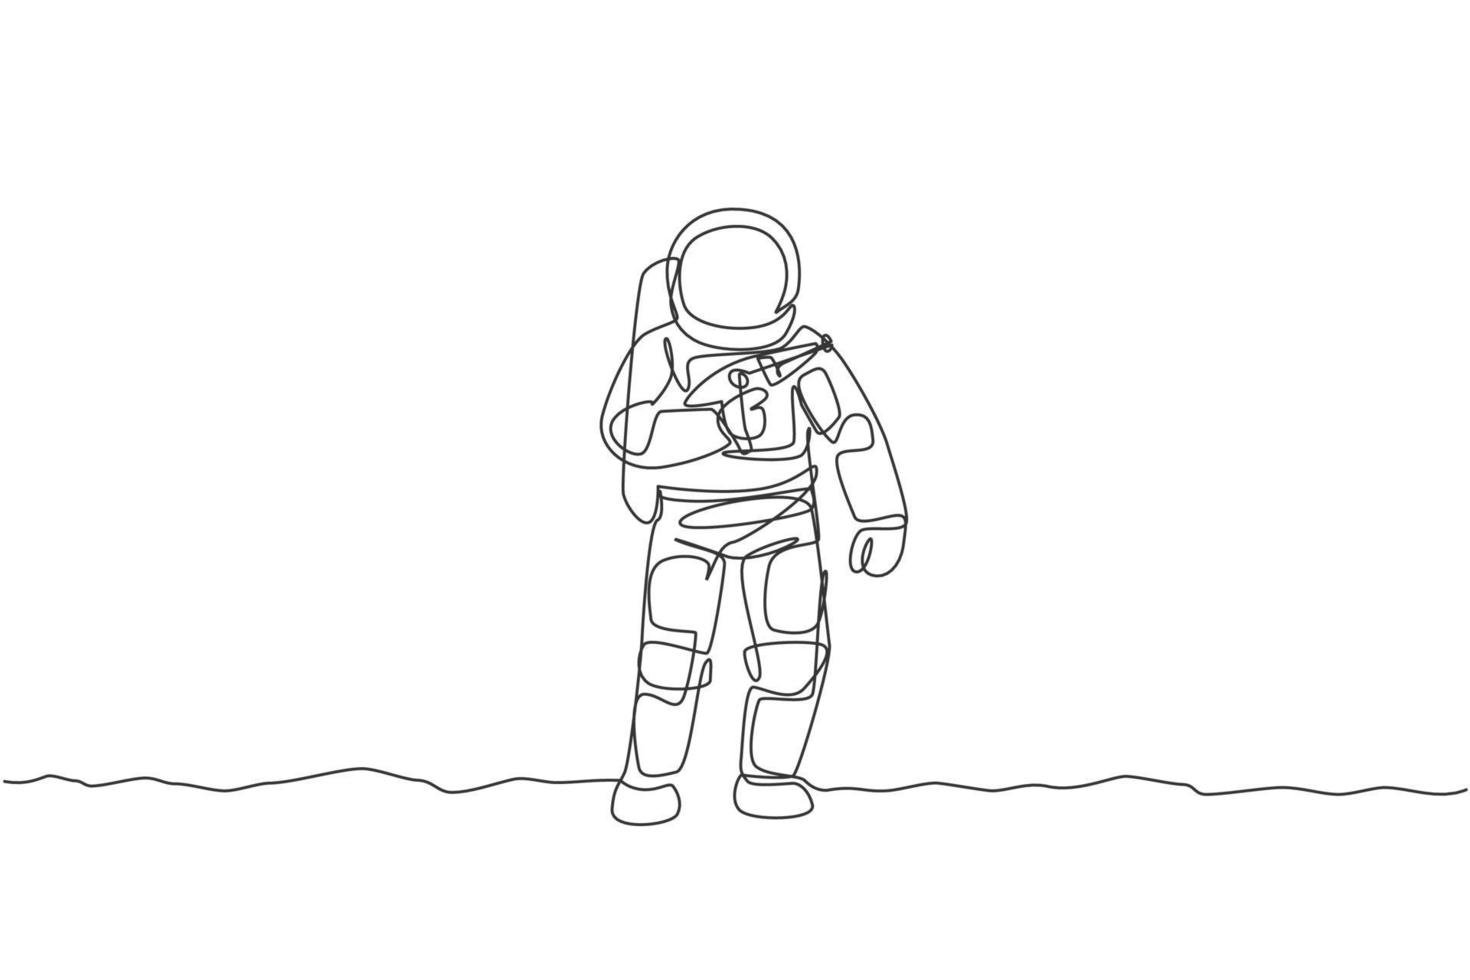 One single line drawing of young astronaut holding space laser gun, prepare to war in moon surface vector graphic illustration. Cosmonaut deep space concept. Modern continuous line draw design